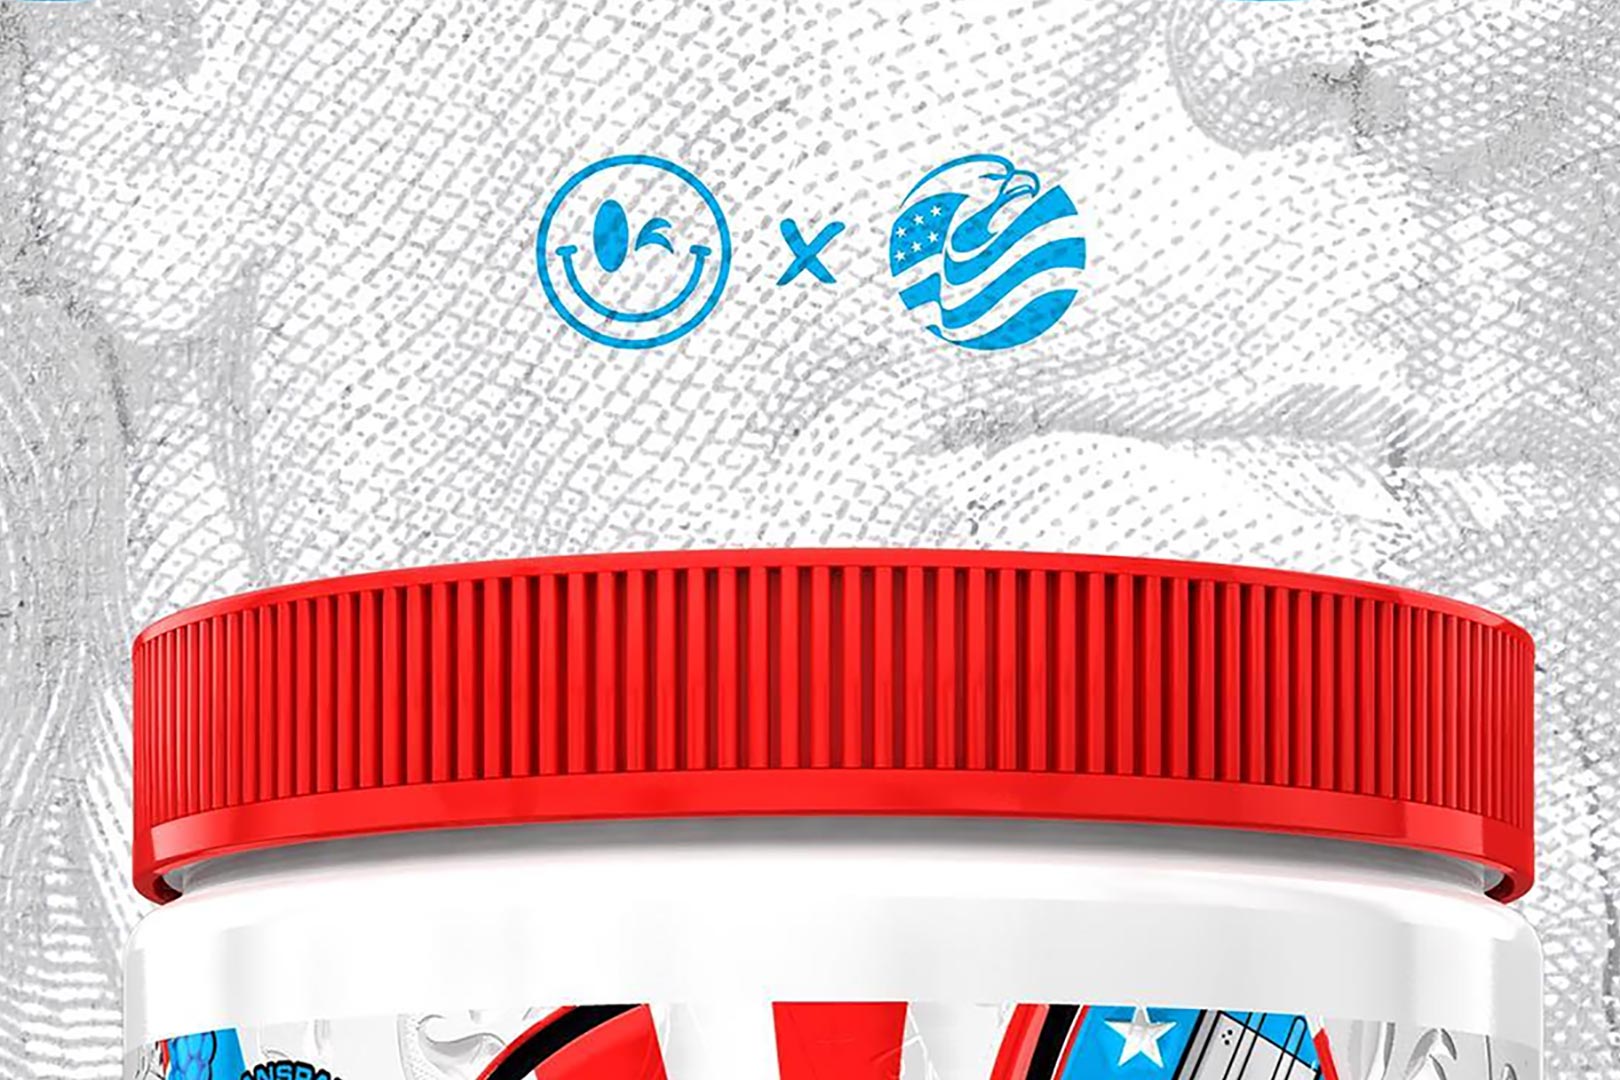 Fresh Supps Teases First Limited Edition Drop